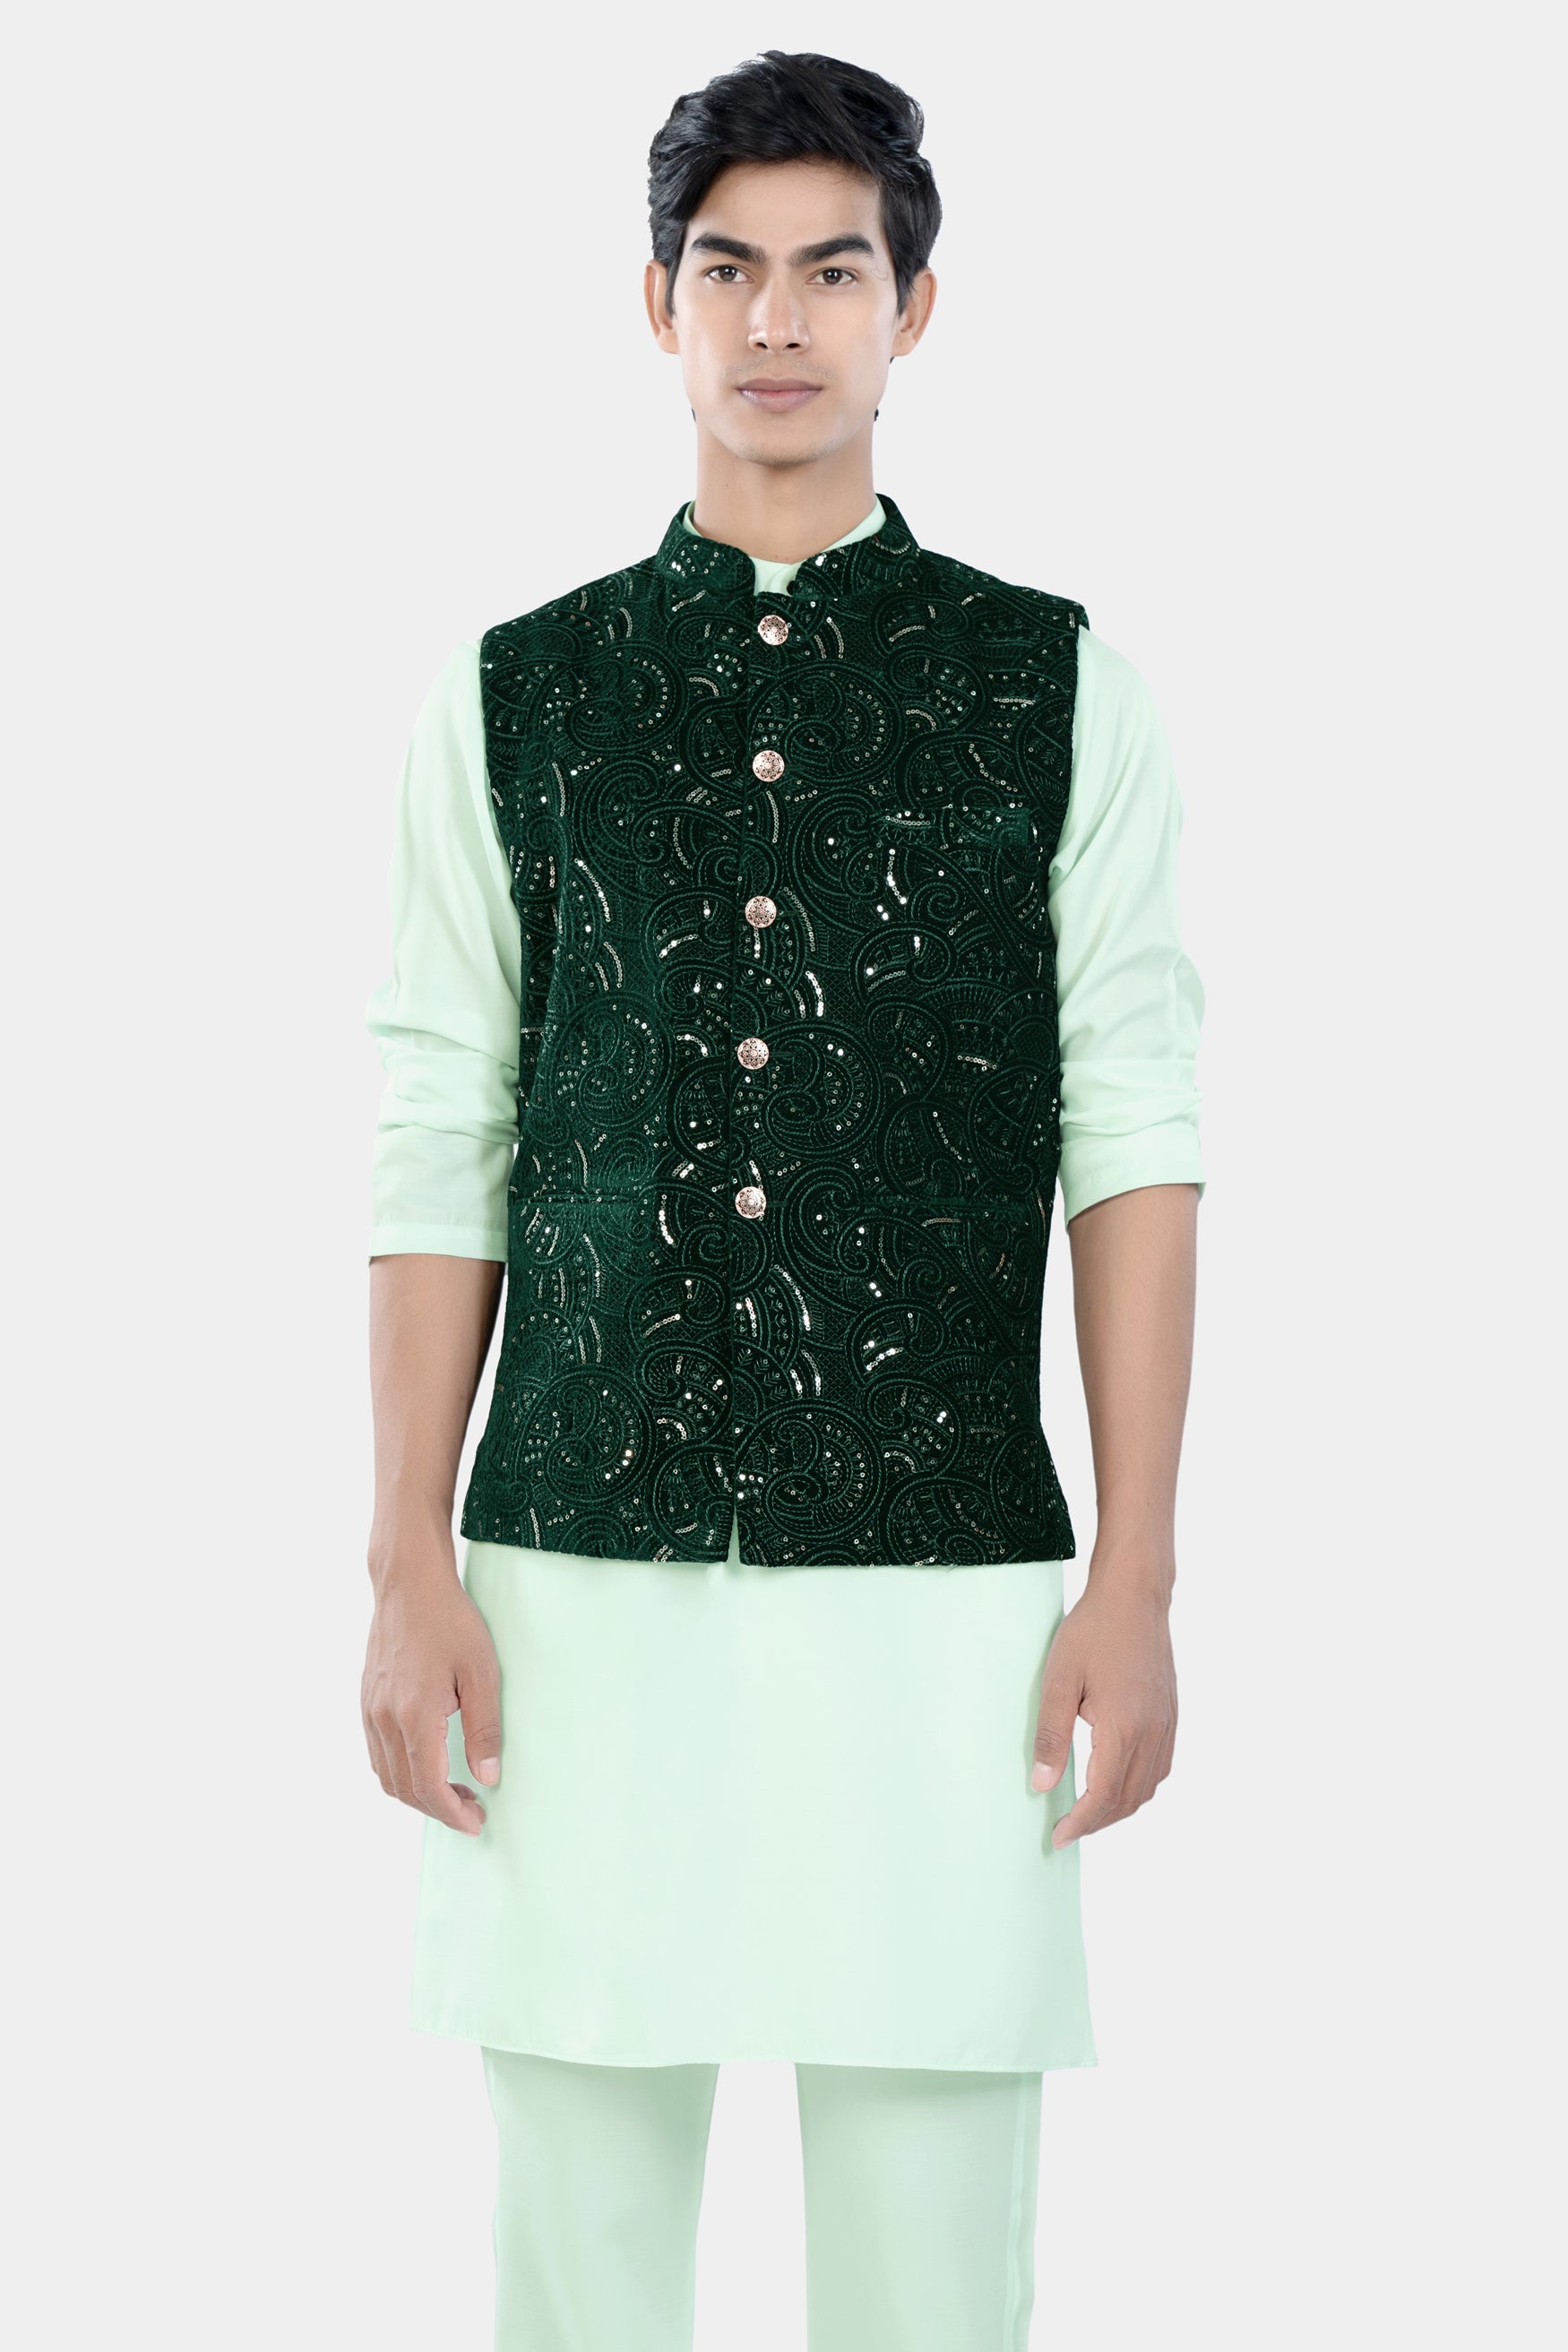 Periglacial Green Kurta Set with Palm and Jewel Green Sequin and Thread Embroidered Designer Nehru Jacket KPNJ024-44,  KPNJ024-46,  KPNJ024-48,  KPNJ024-50,  KPNJ024-52,  KPNJ024-54,  KPNJ024-56,  KPNJ024-58,  KPNJ024-60